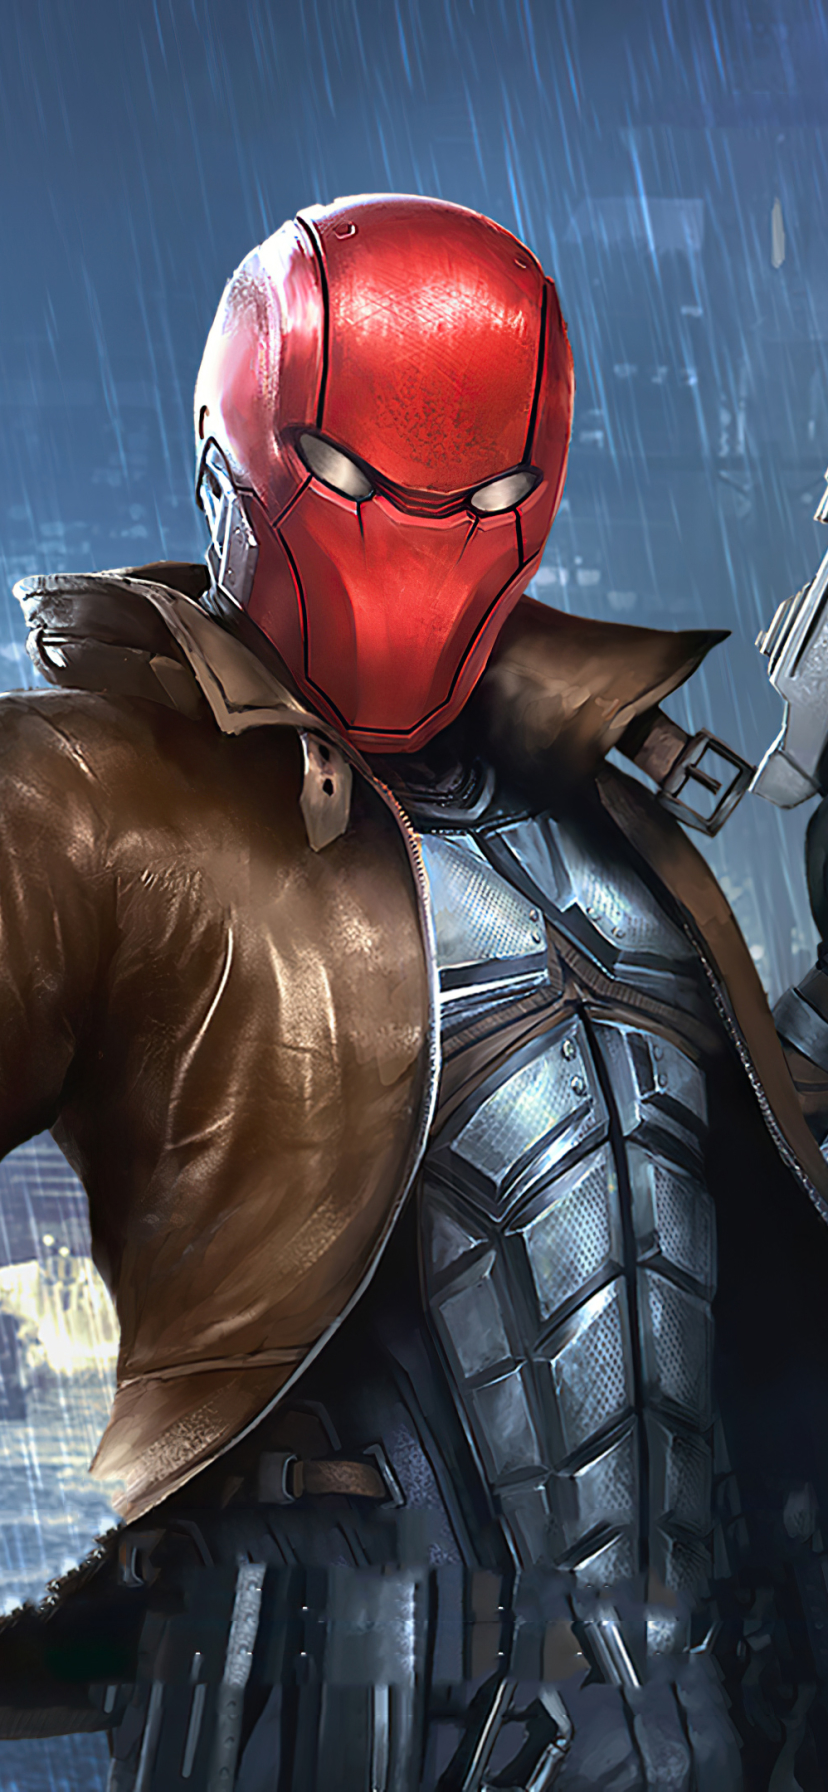 Mobile wallpaper: Video Game, Dc Comics, Red Hood, Injustice Injustice, 1171543 download the picture for free